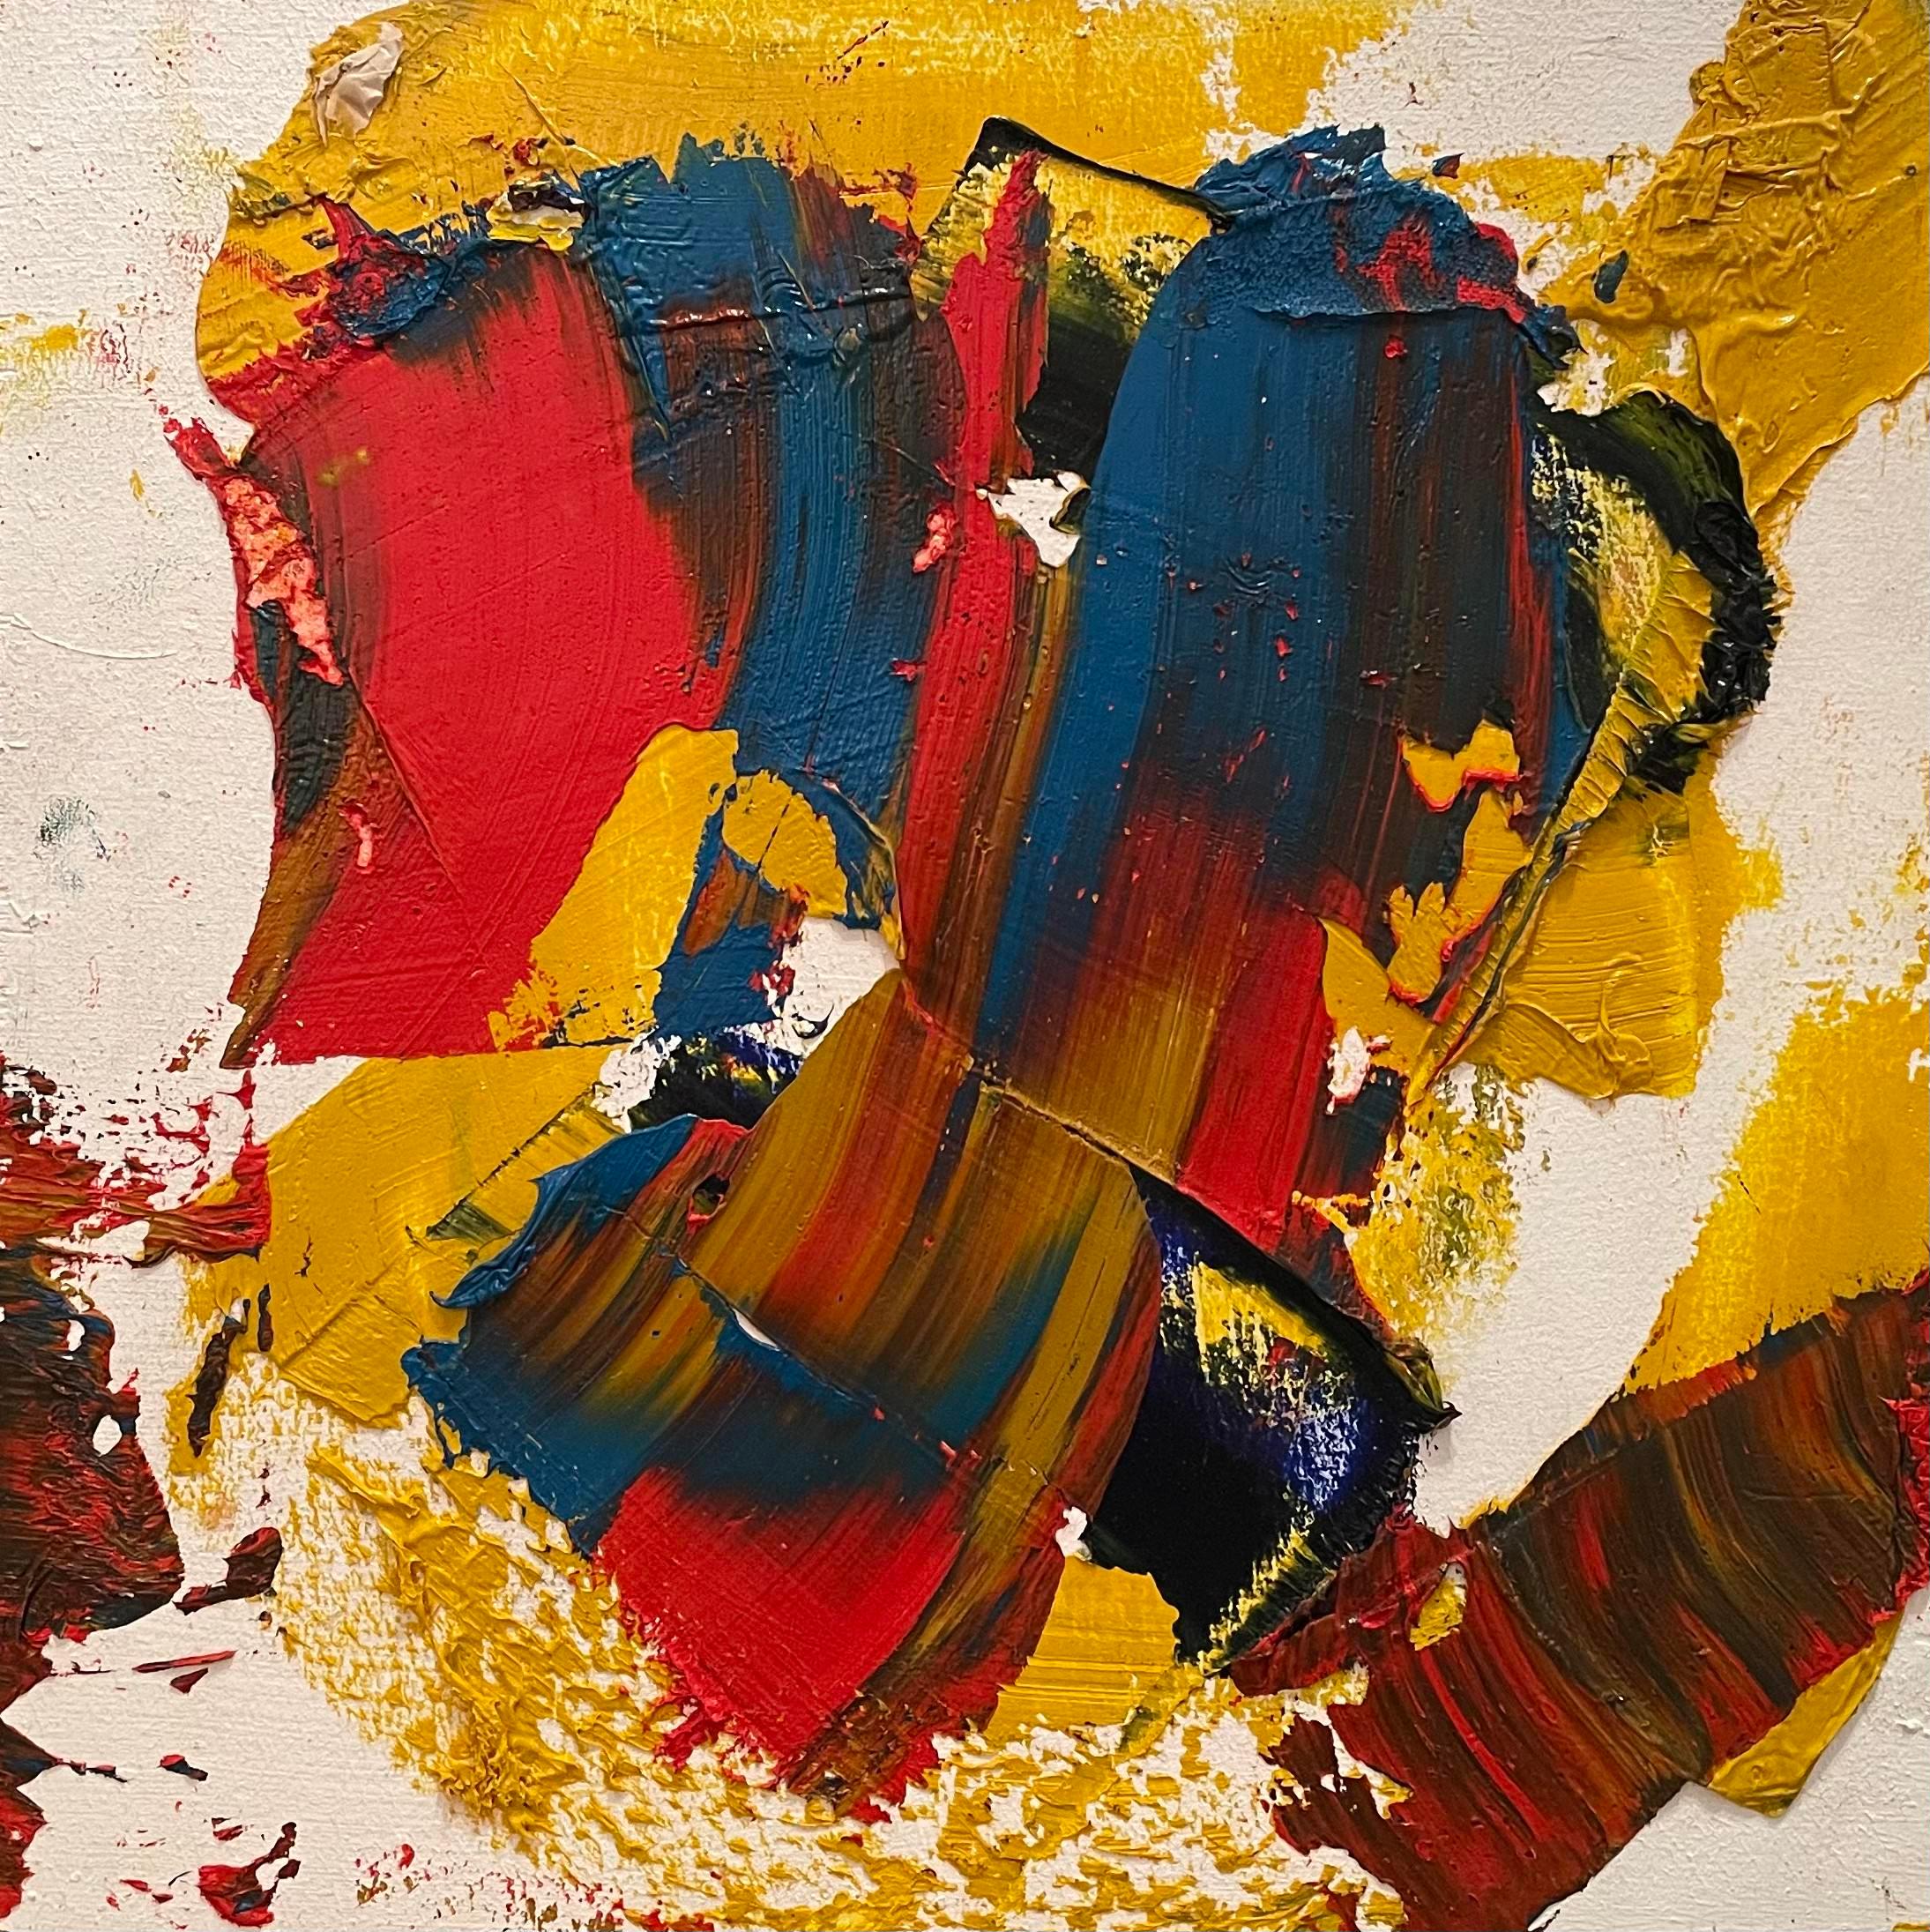 'Untitled' Yellow, Red, Blue, & White Mixed Media Contemporary Abstract  - Painting by Steven H. Rehfeld